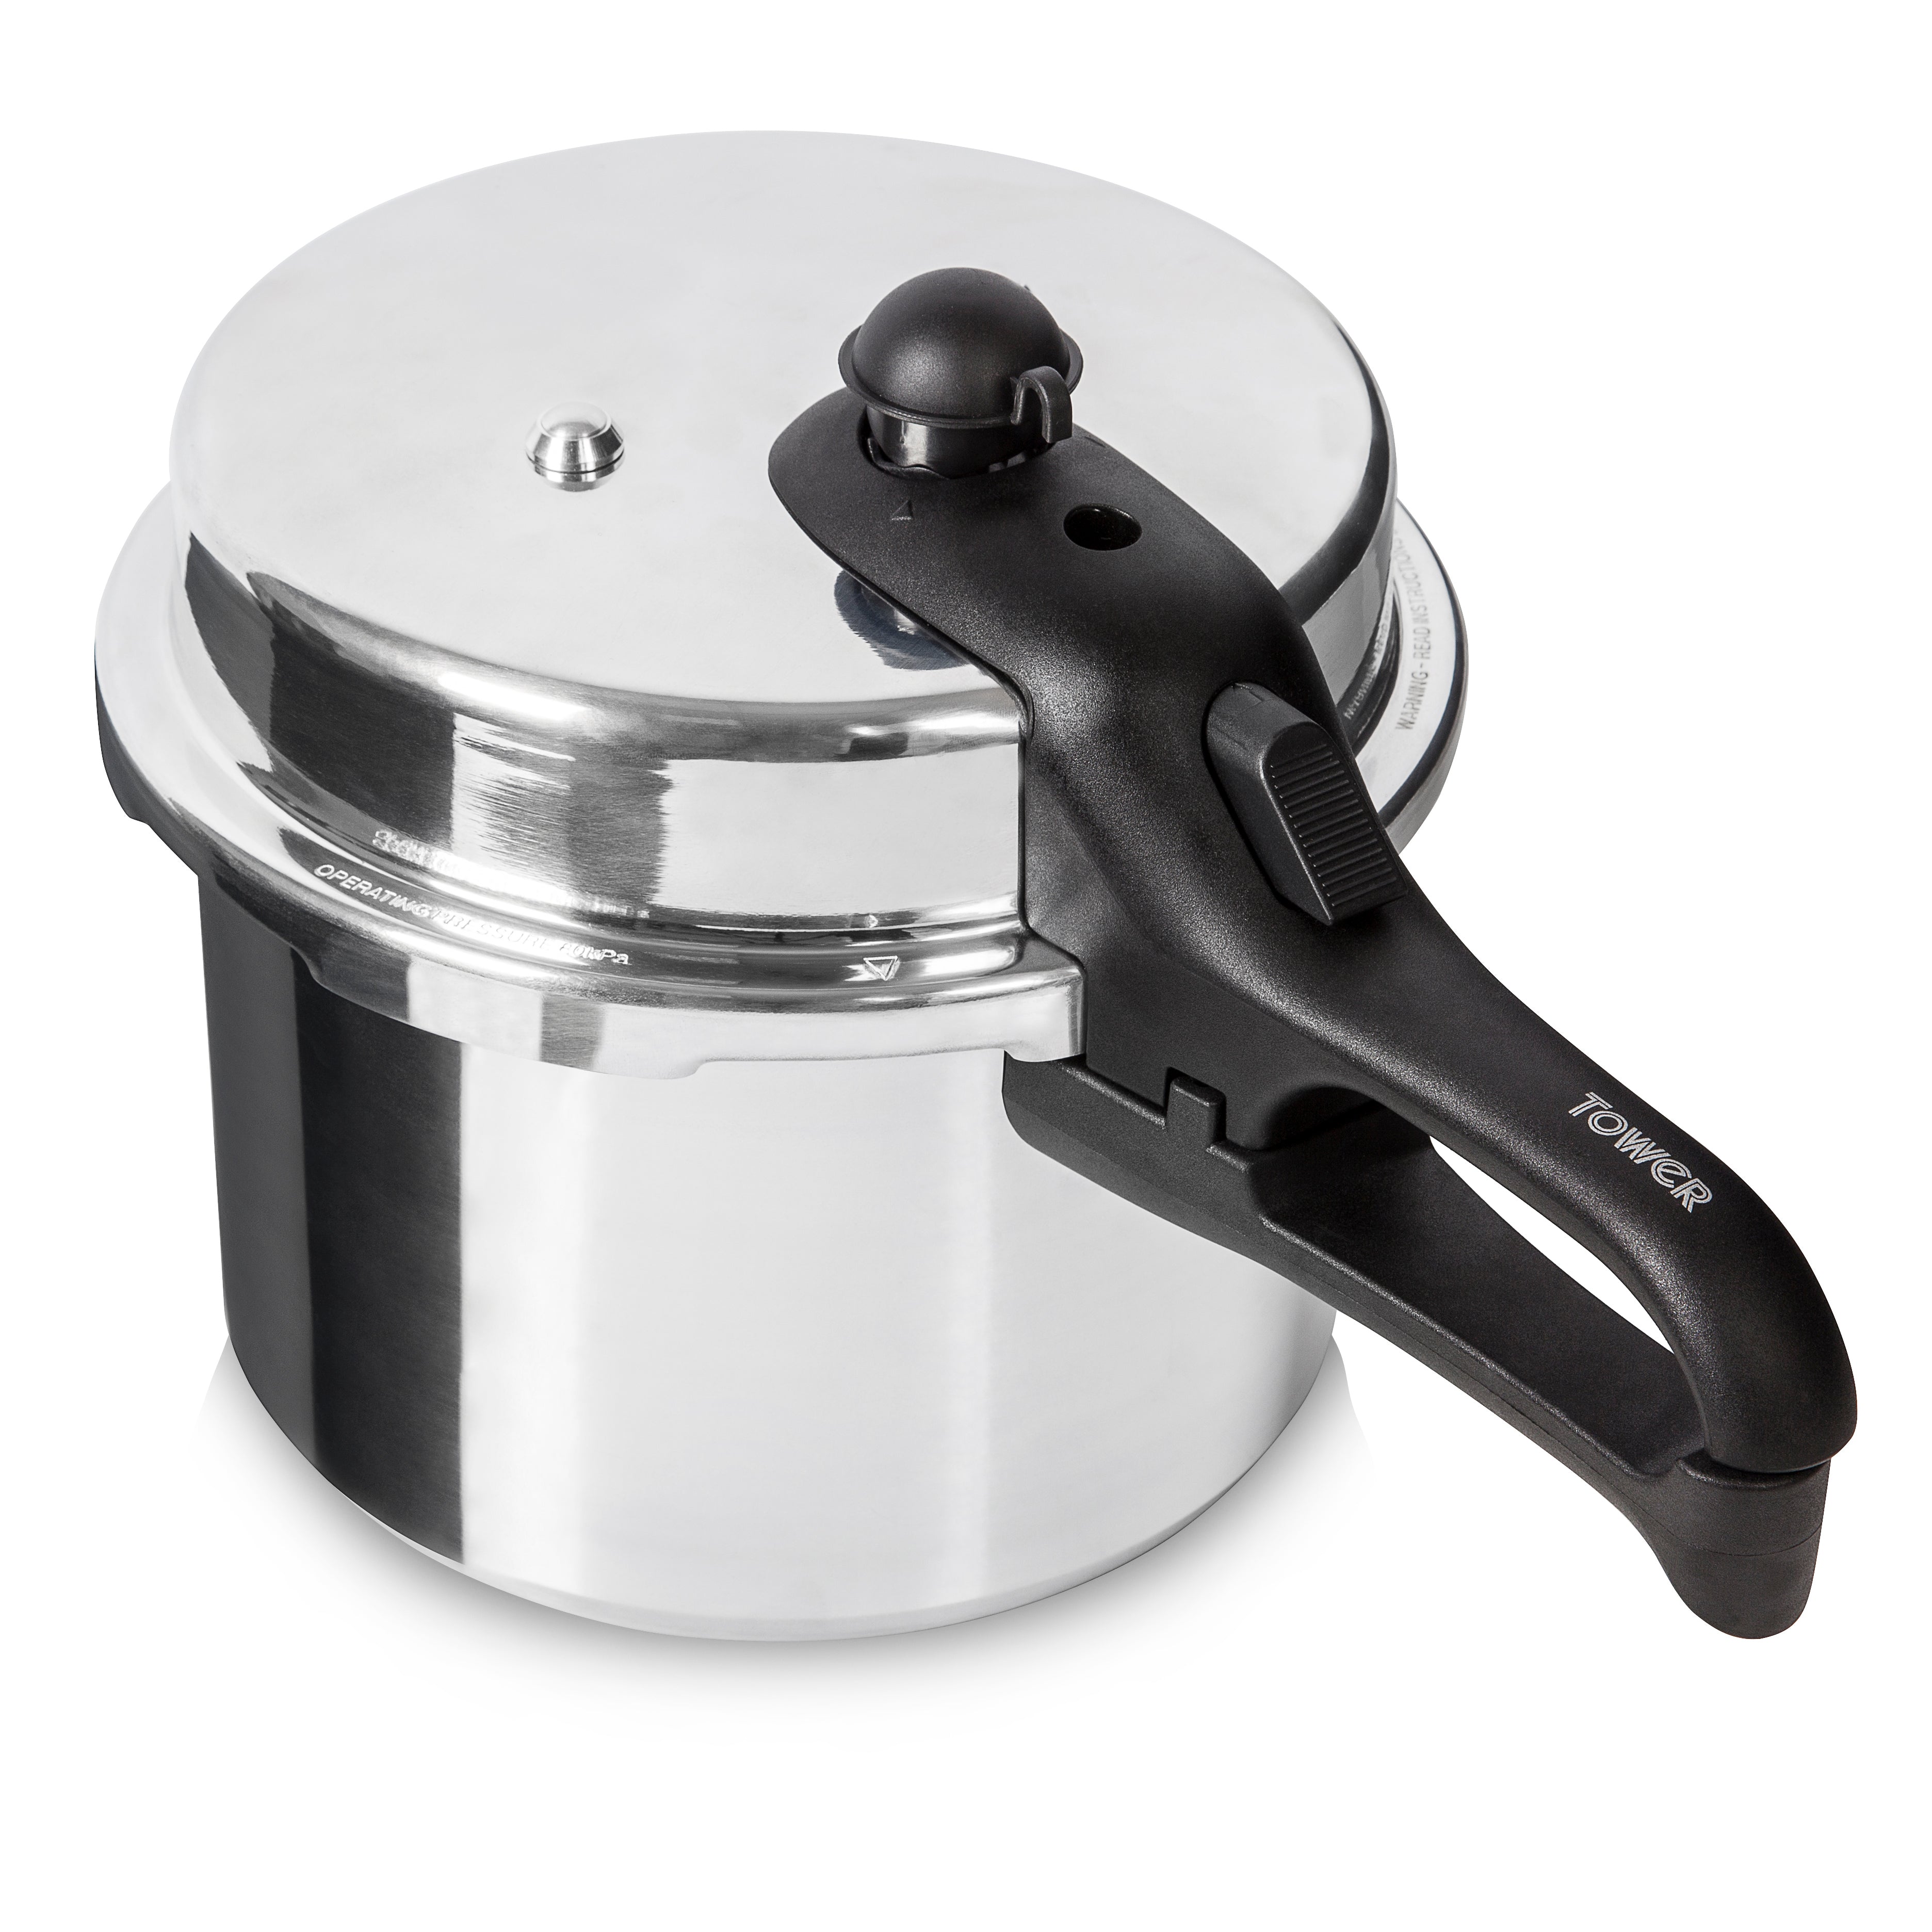 Tower High Dome 6 Litre Pressure Cooker - Silver